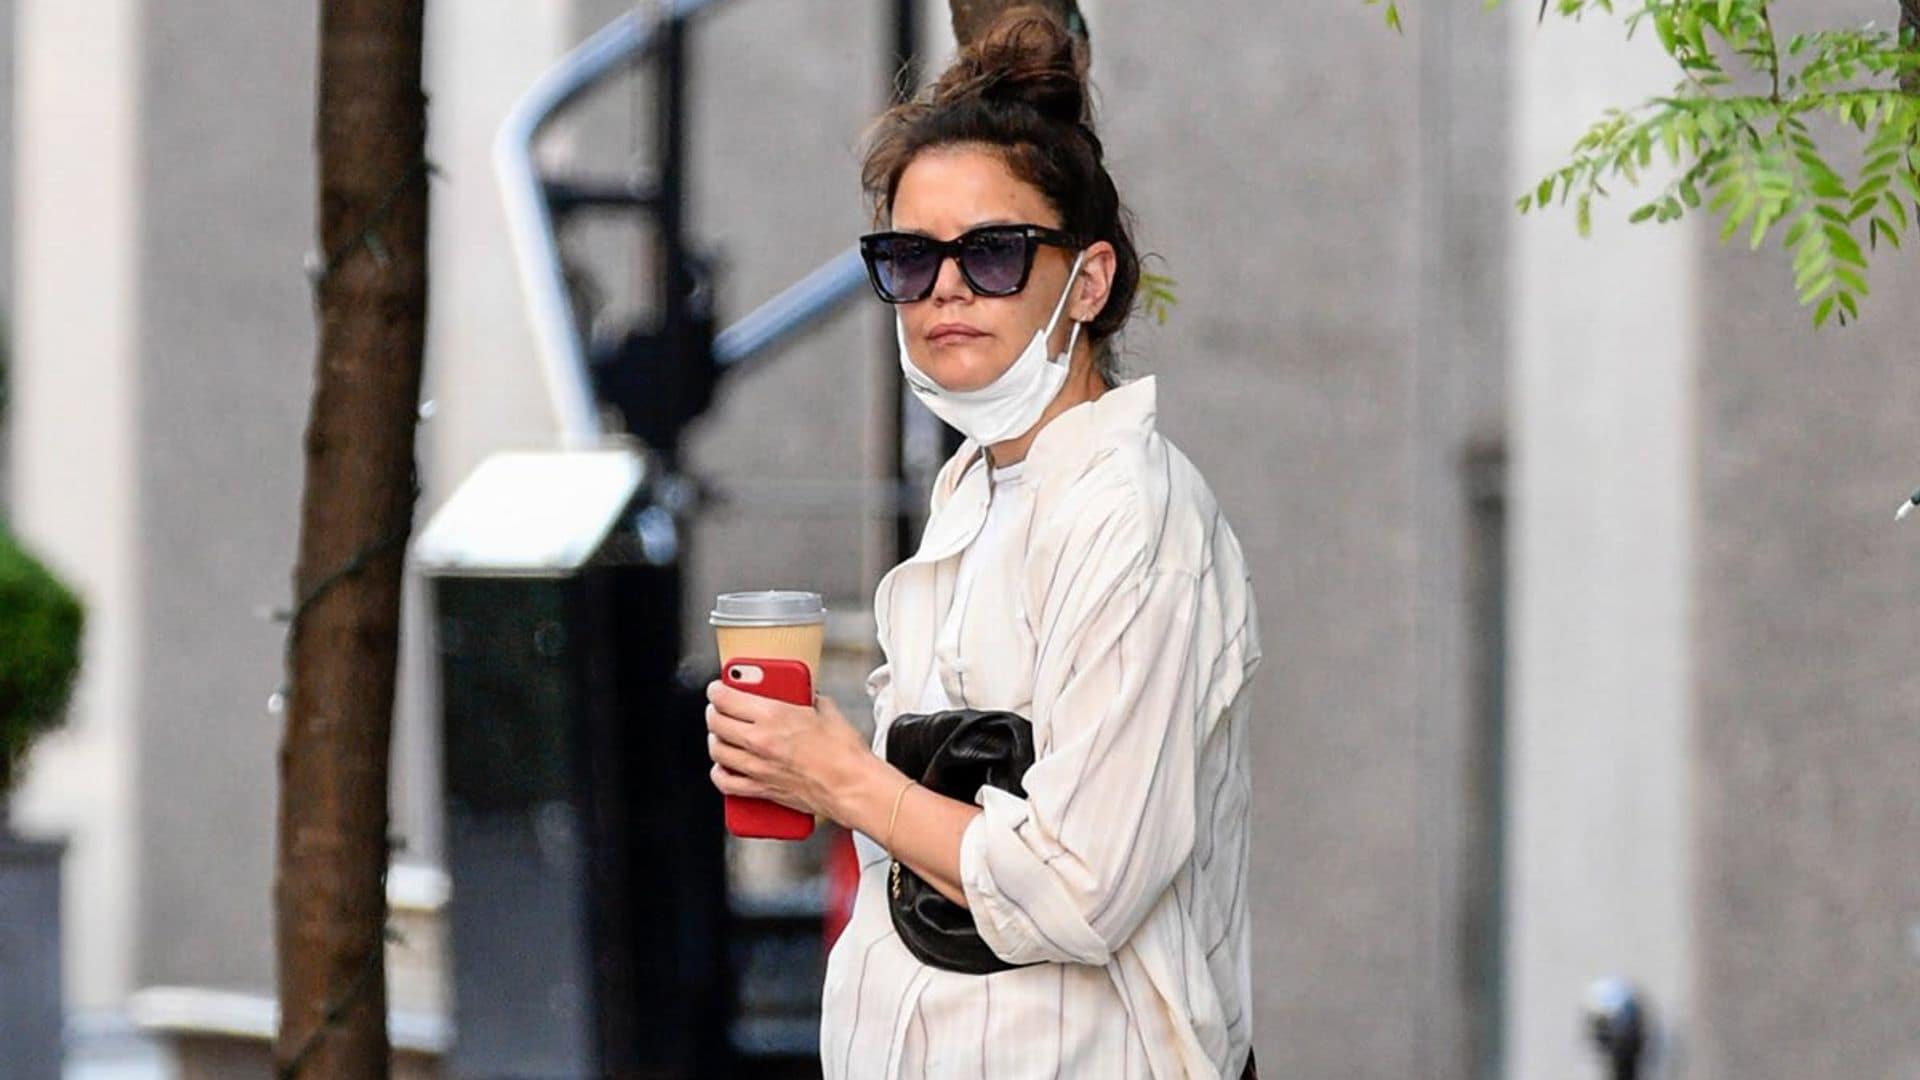 Katie Holmes was seen out for the first time since her breakup